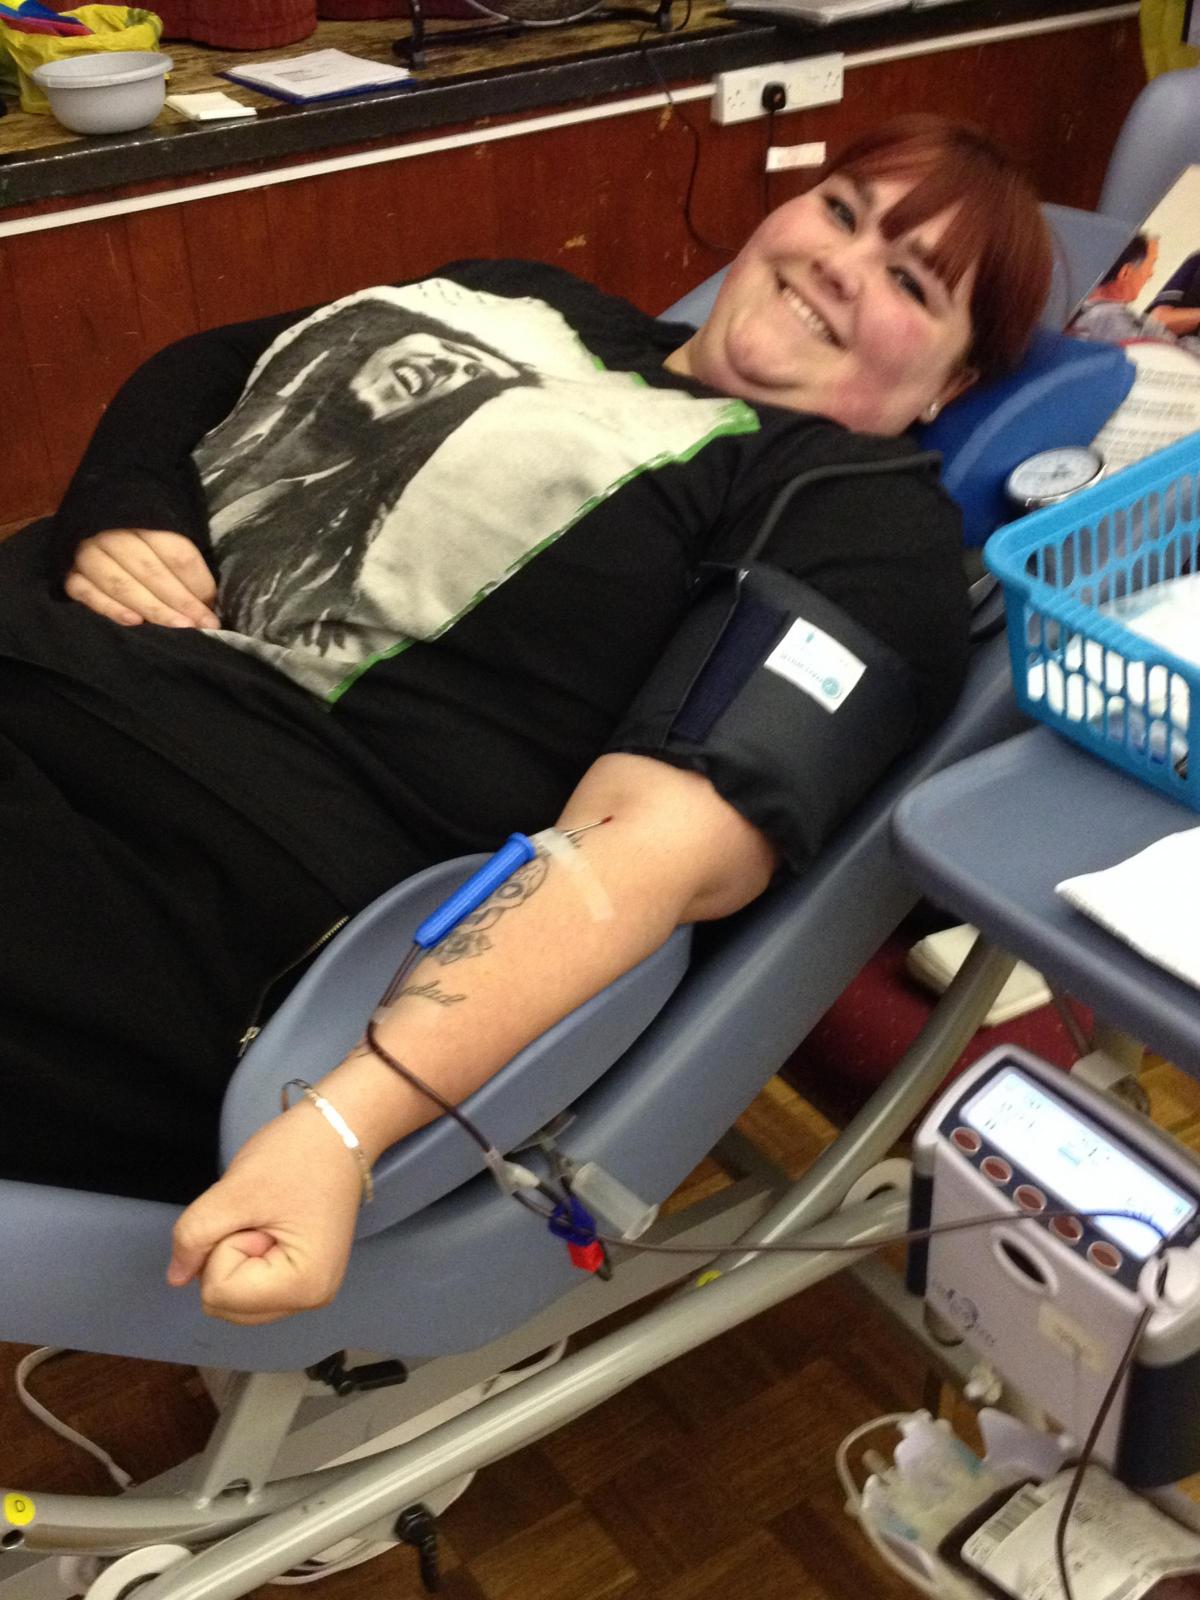 Ashley's cousin Natalie gave blood today with her husband James